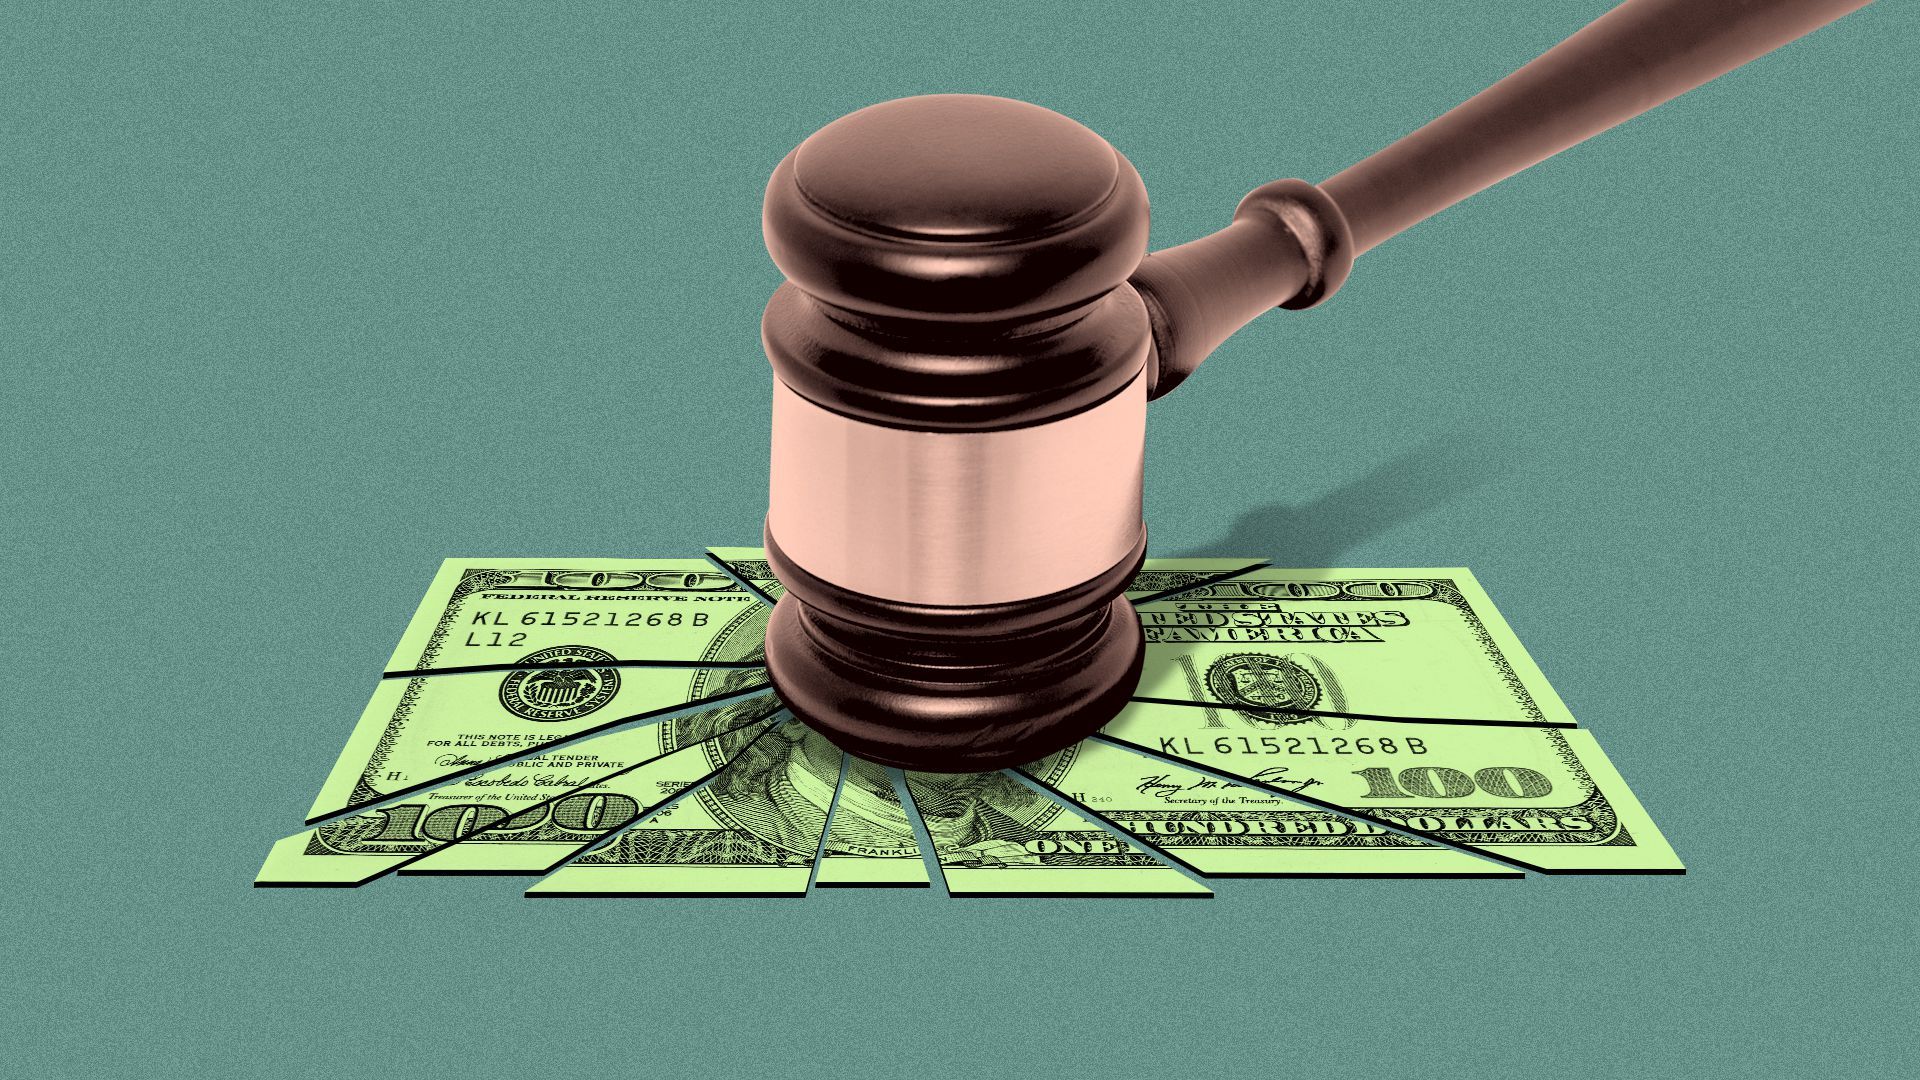 Illustration of a hundred-dollar bill being shattered by a gavel.